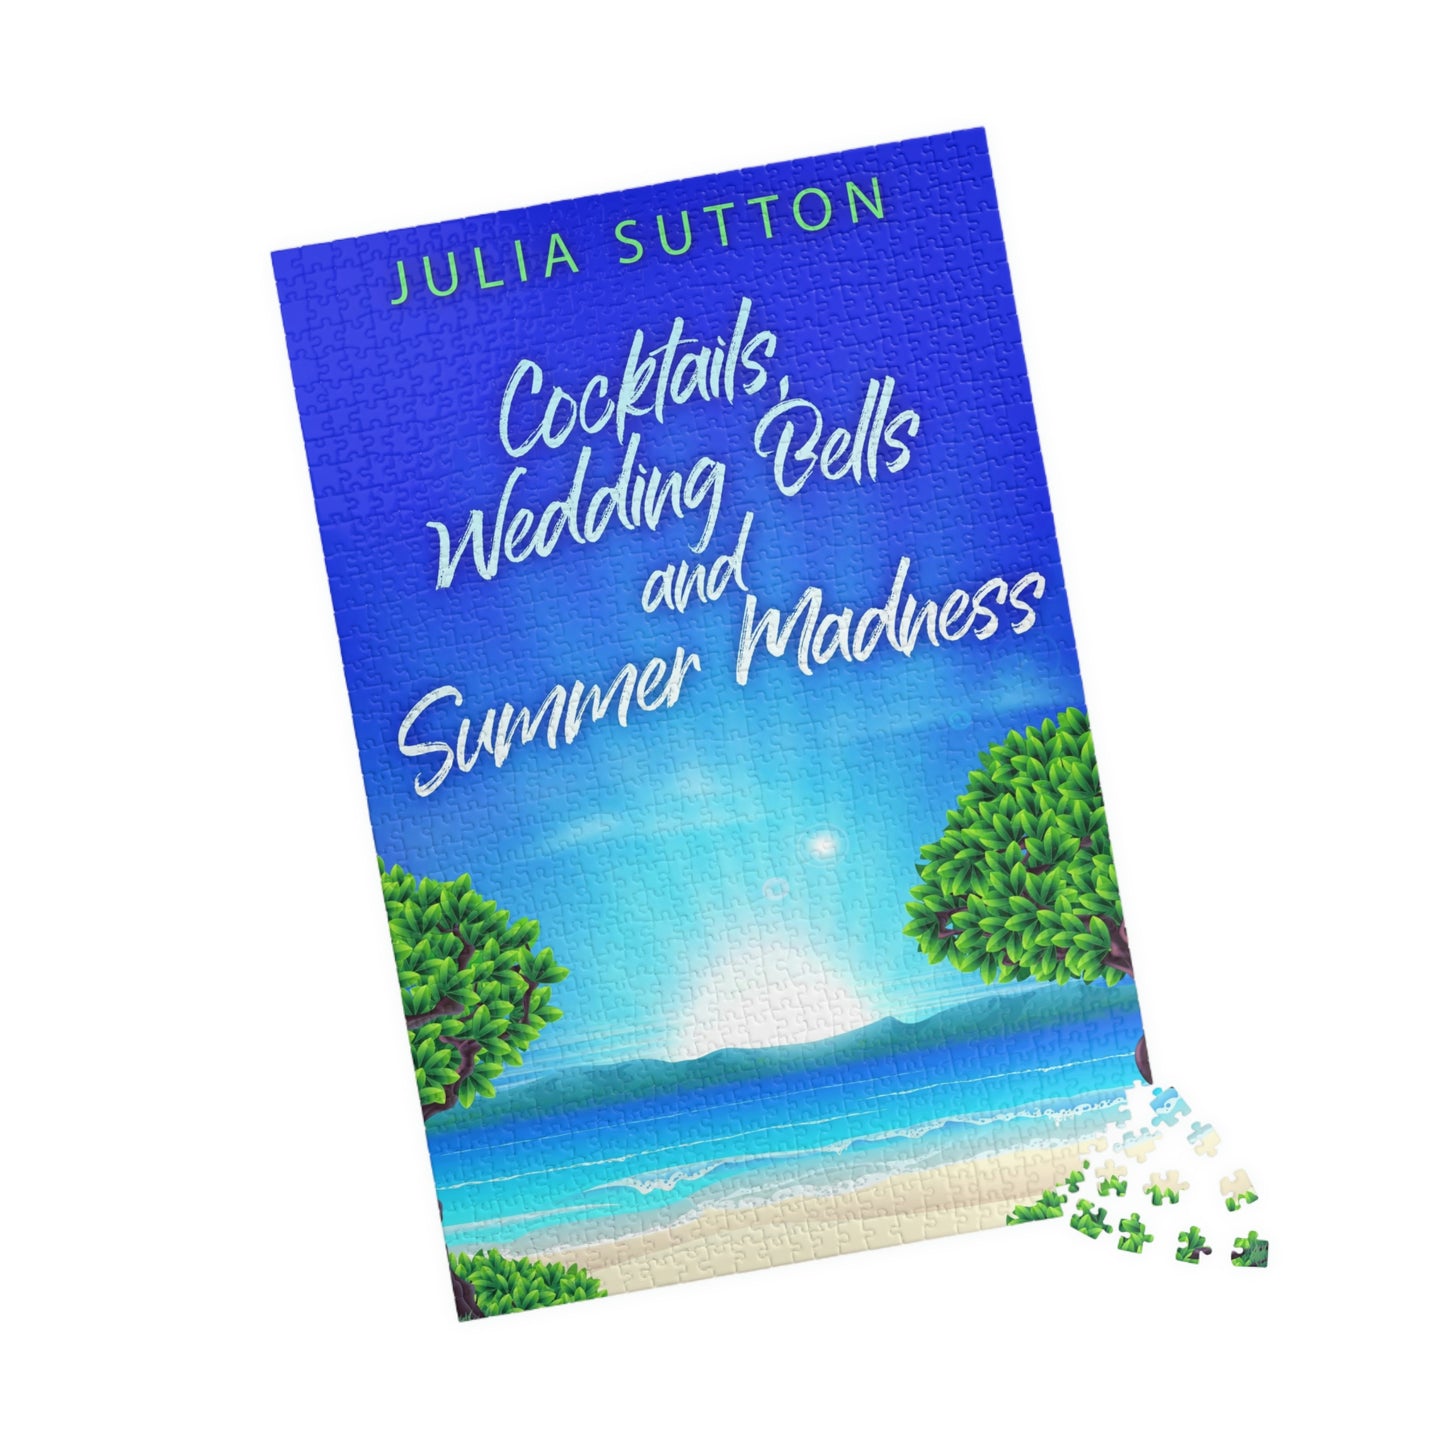 Cocktails, Wedding Bells and Summer Madness - 1000 Piece Jigsaw Puzzle